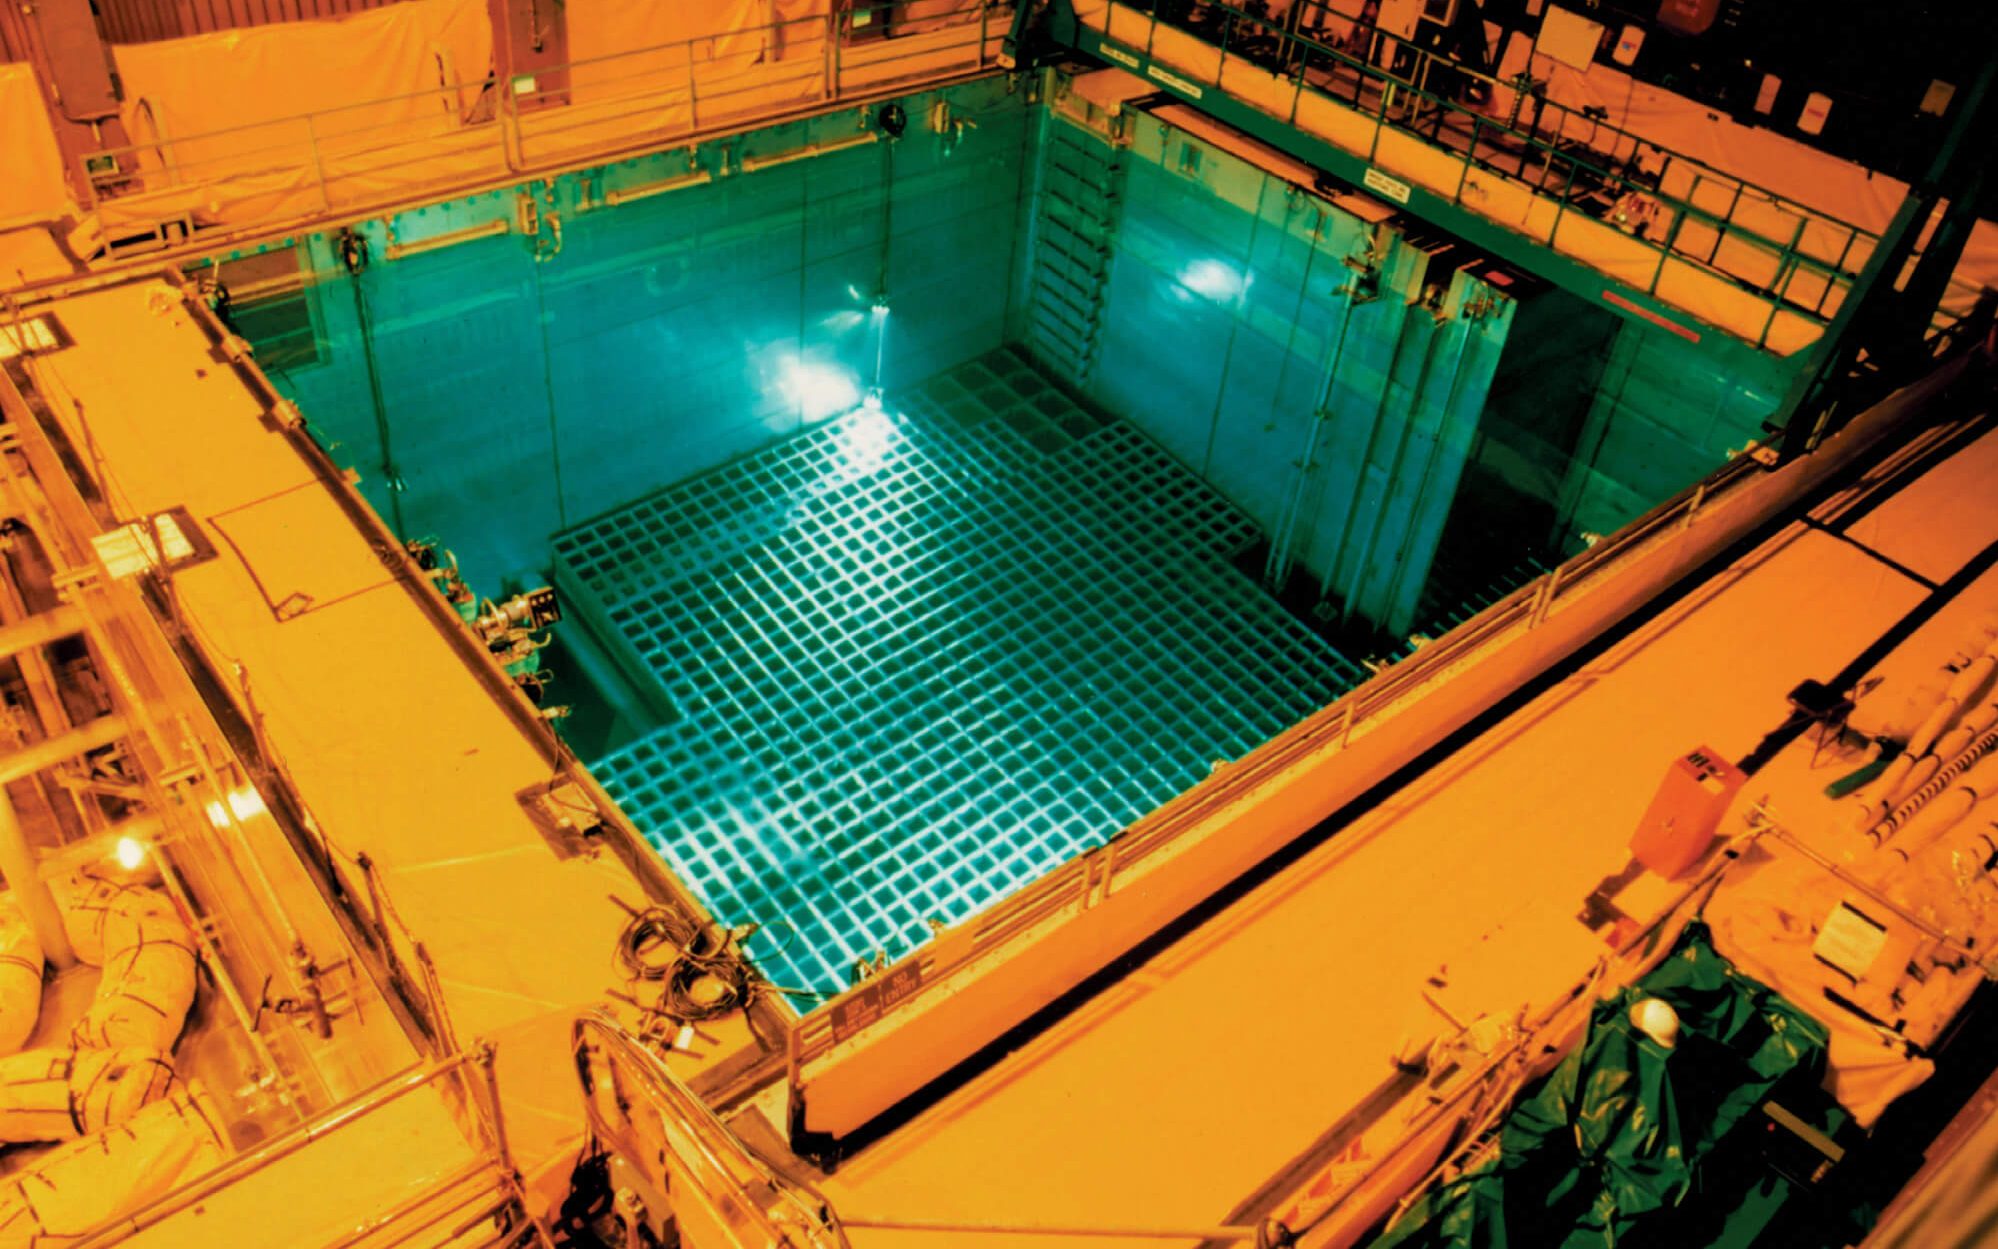 Cooling pool inside a nuclear power plant